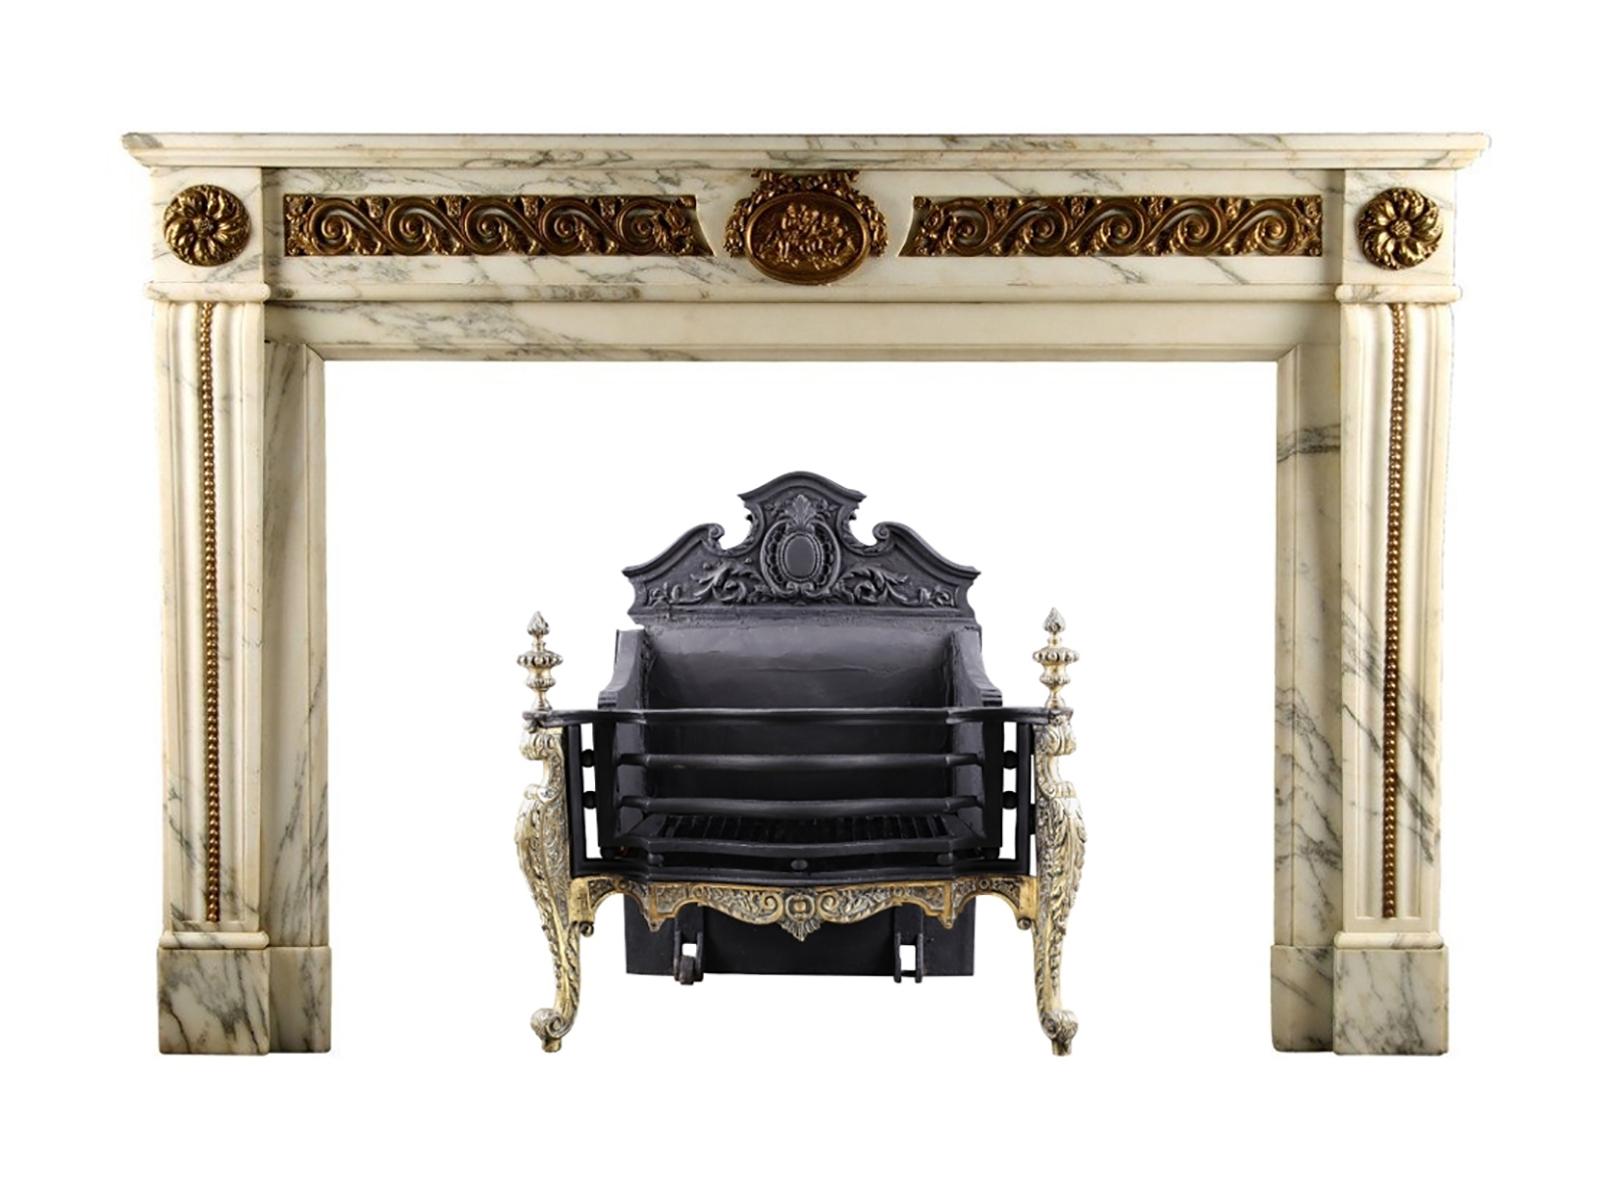 Impressive Louis XVI Regency fireplace mantel

An Impressive Louis XVI fireplace mantel in the French Regency manner, in nicely veined white Pavonazzo marble, decorated with very fine quality gilt-bronze vitruvian scrolls, representing the waves,